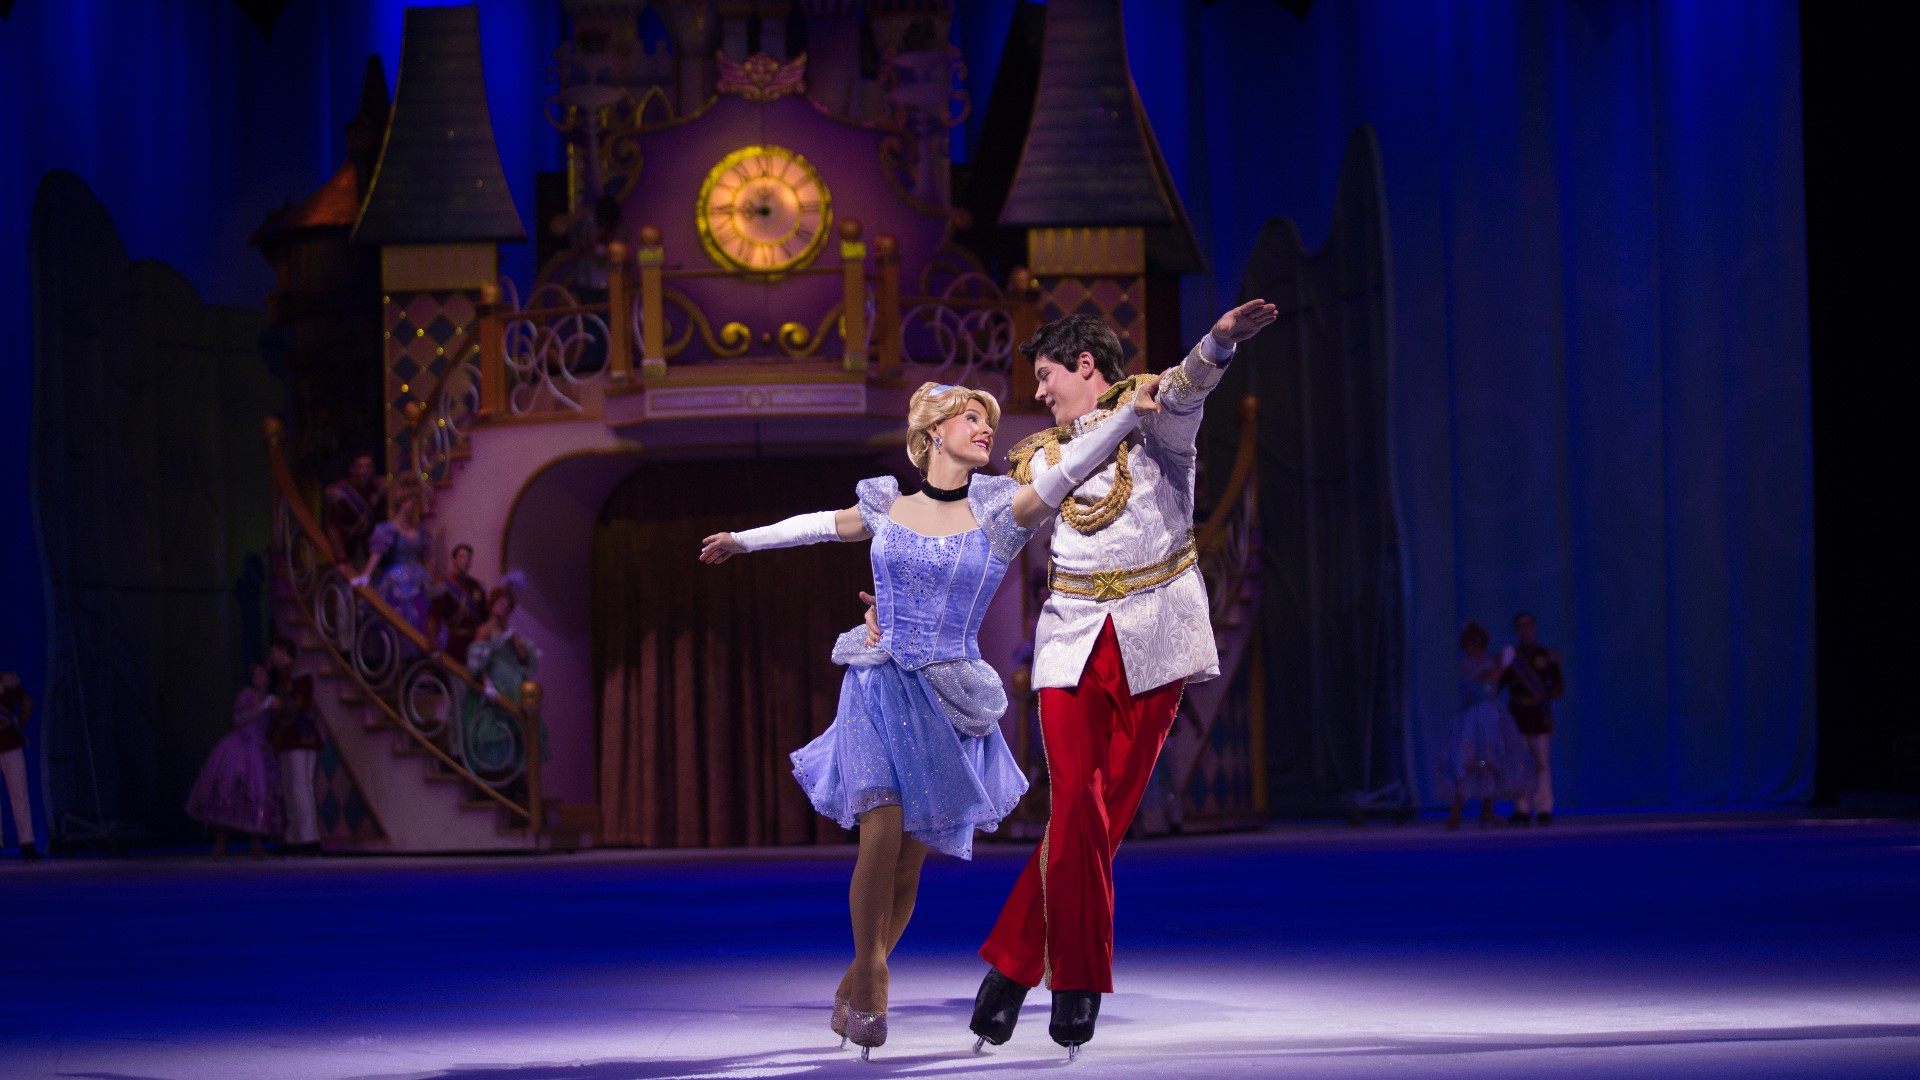 A Disney On Ice skater discussed "Into the Magic" and what makes the show so special for kids.